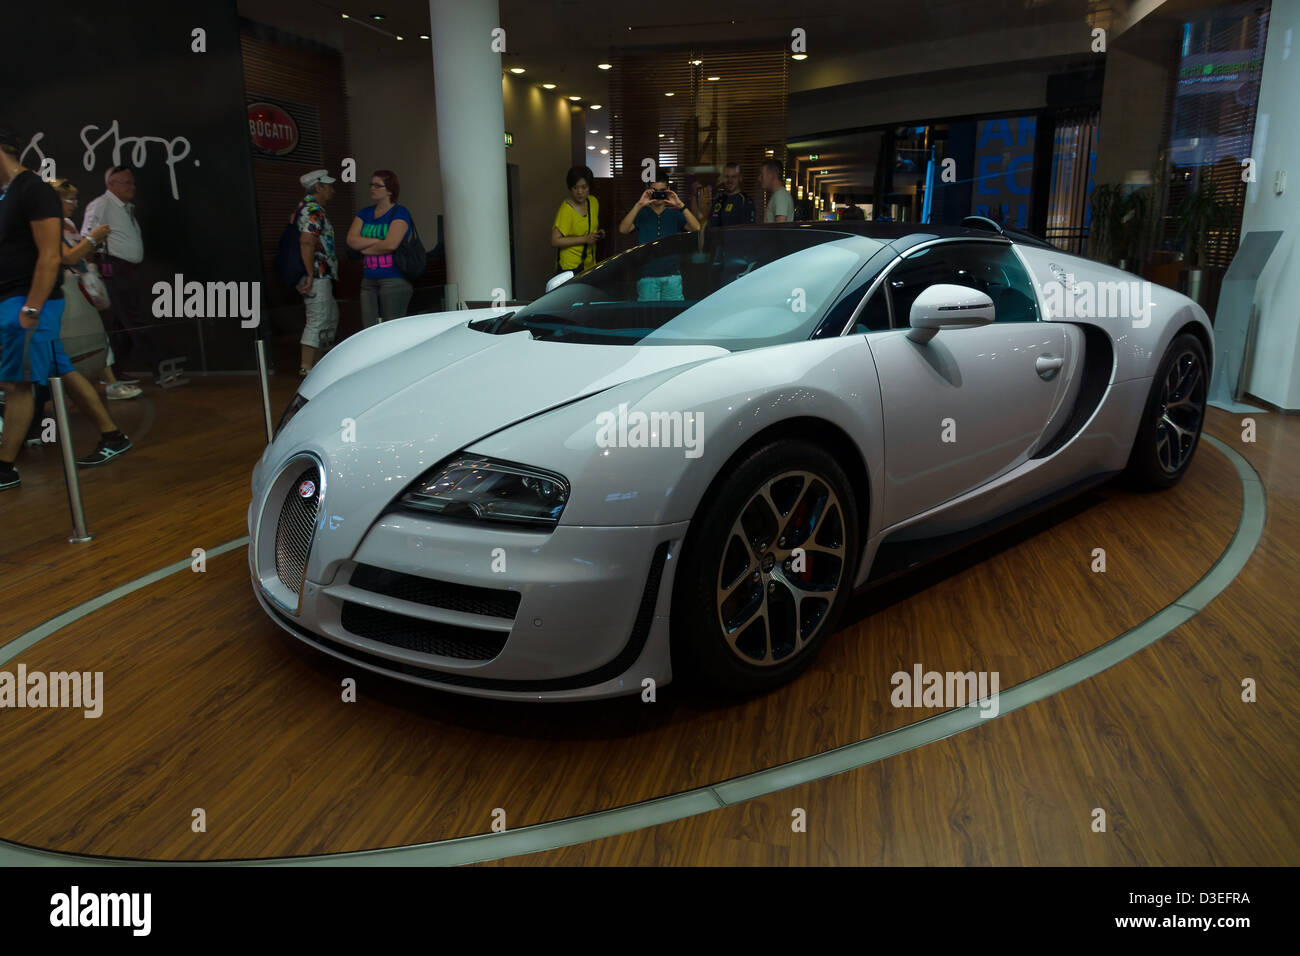 The Bugatti Veyron EB 16.4 is a mid-engined grand touring car. Bugatti Veyron - the fastest car in the world. Stock Photo